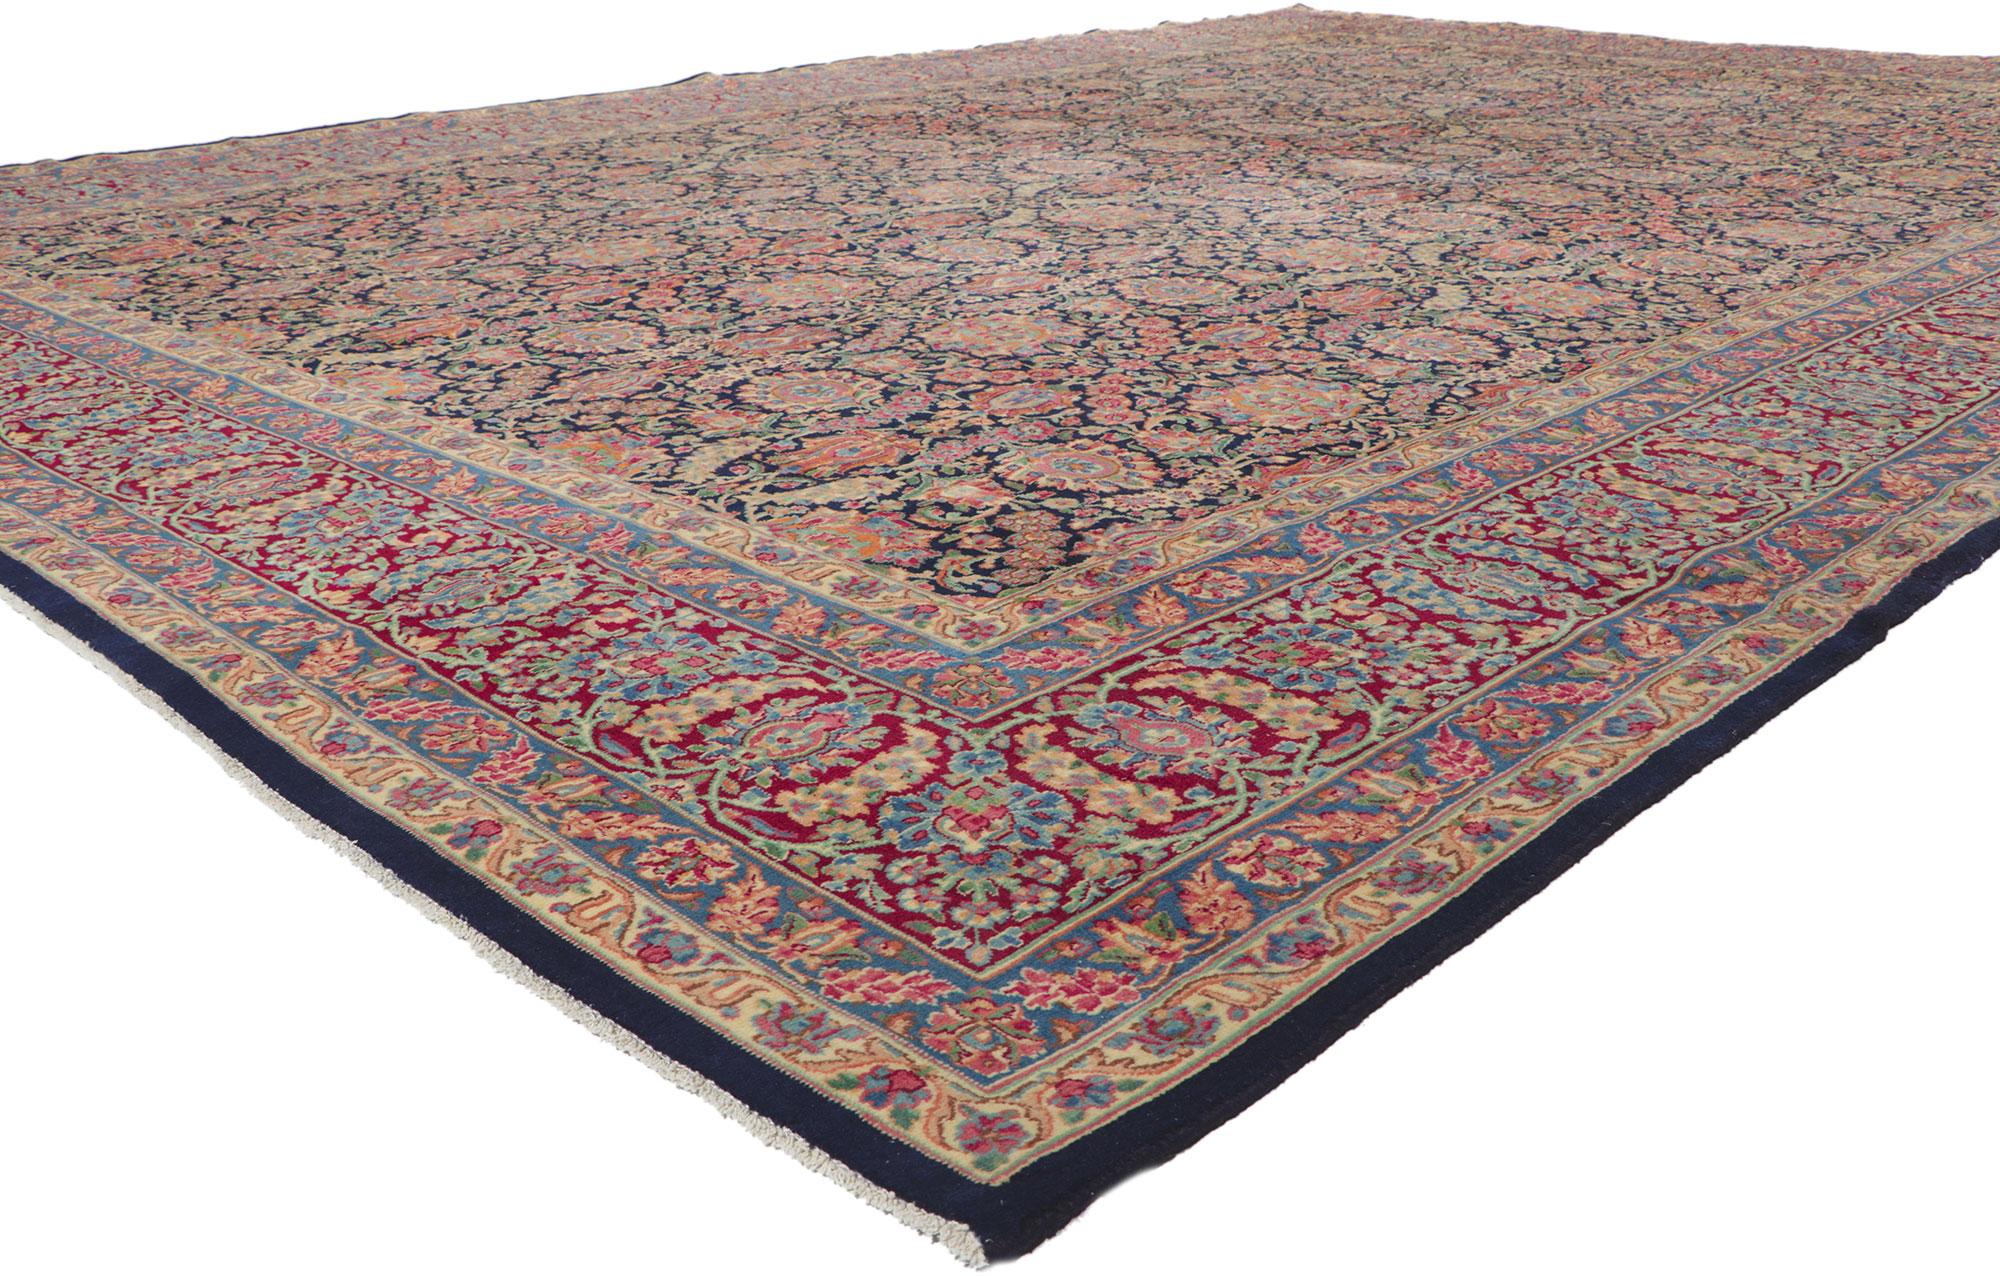 61210 Antique Persian Kerman Rug, 11'03 x 16'01. Opulence and grace combined with incredible detail and texture, this hand knotted wool antique Persian Kerman rug is a captivating vision of woven beauty. The allover botanical design and